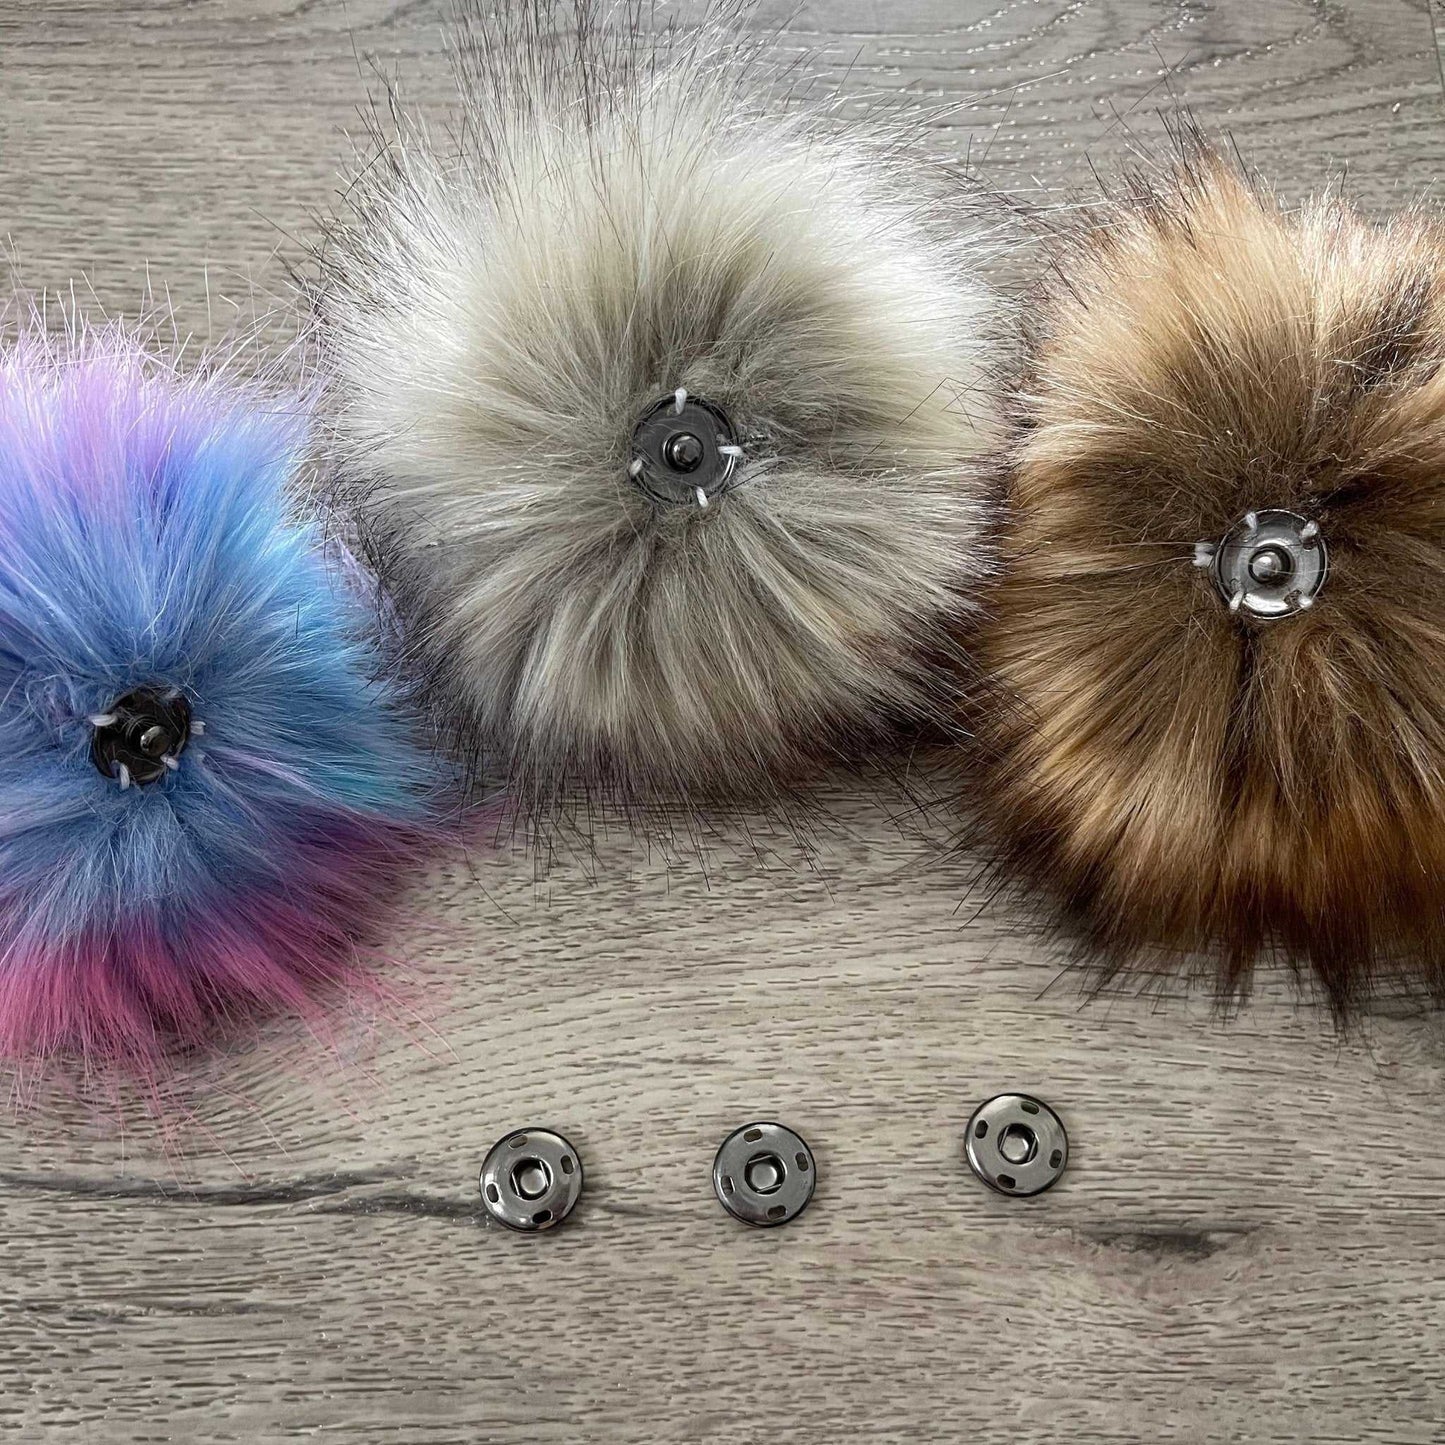 Caracal Luxury Faux Fur Pom pom | Tan, Brown and Blonde Tie, Button or Snap Pom pom Pom Poms 6 $ Buttons & Beans Co.